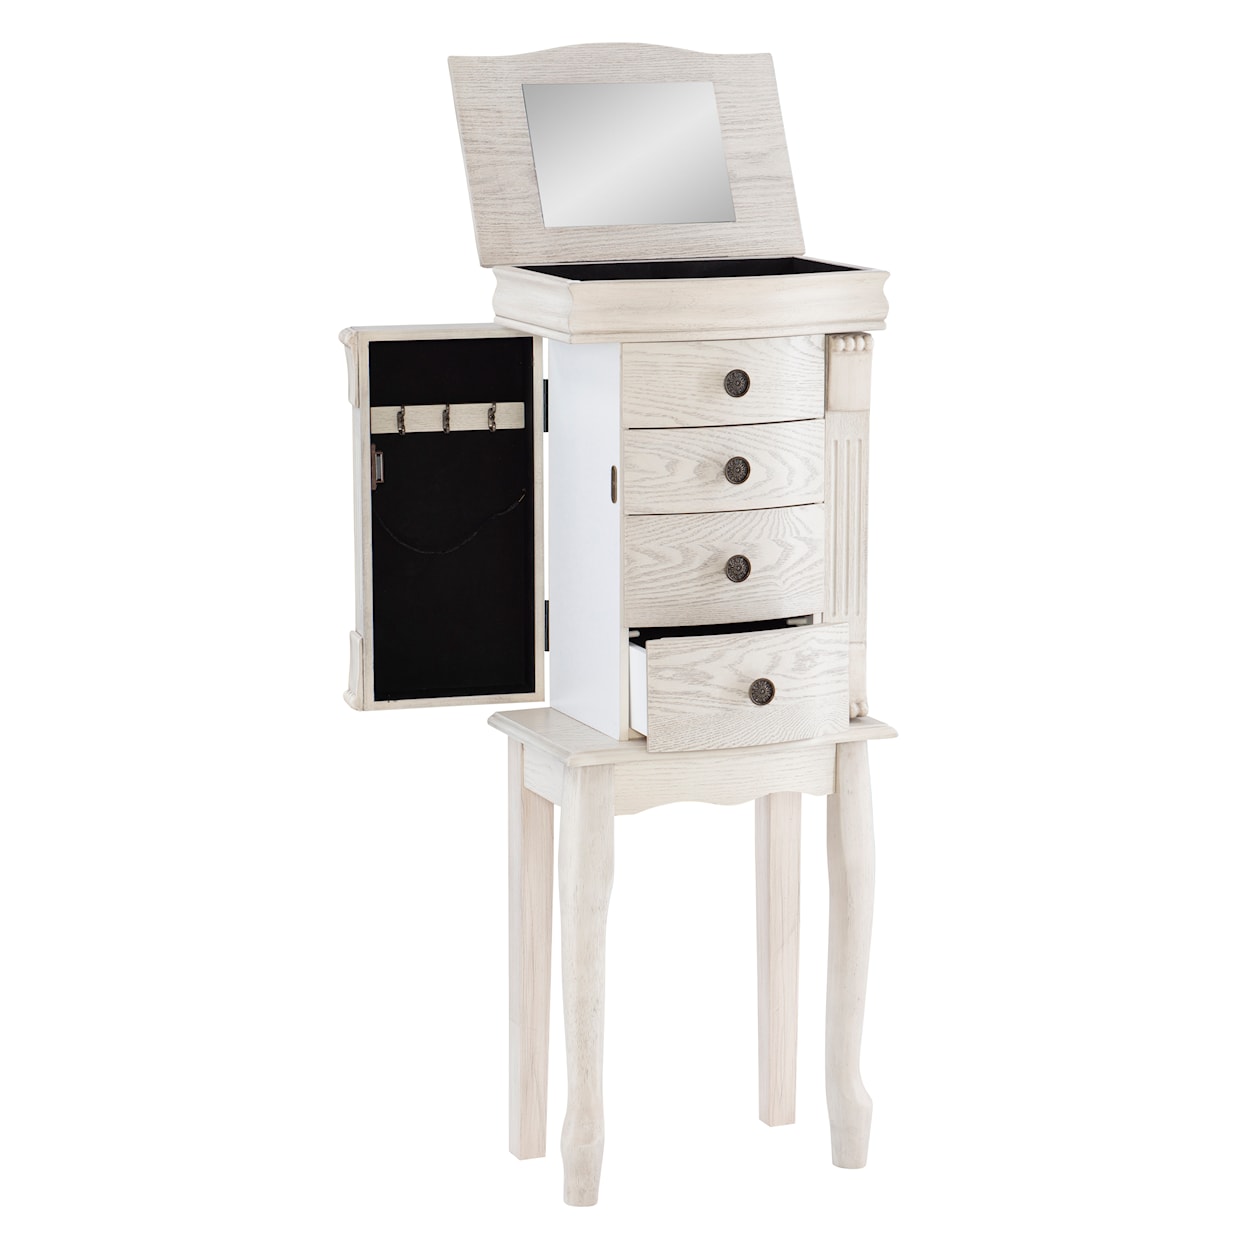 Powell Louis Philippe Jewelry Armoire - Off White